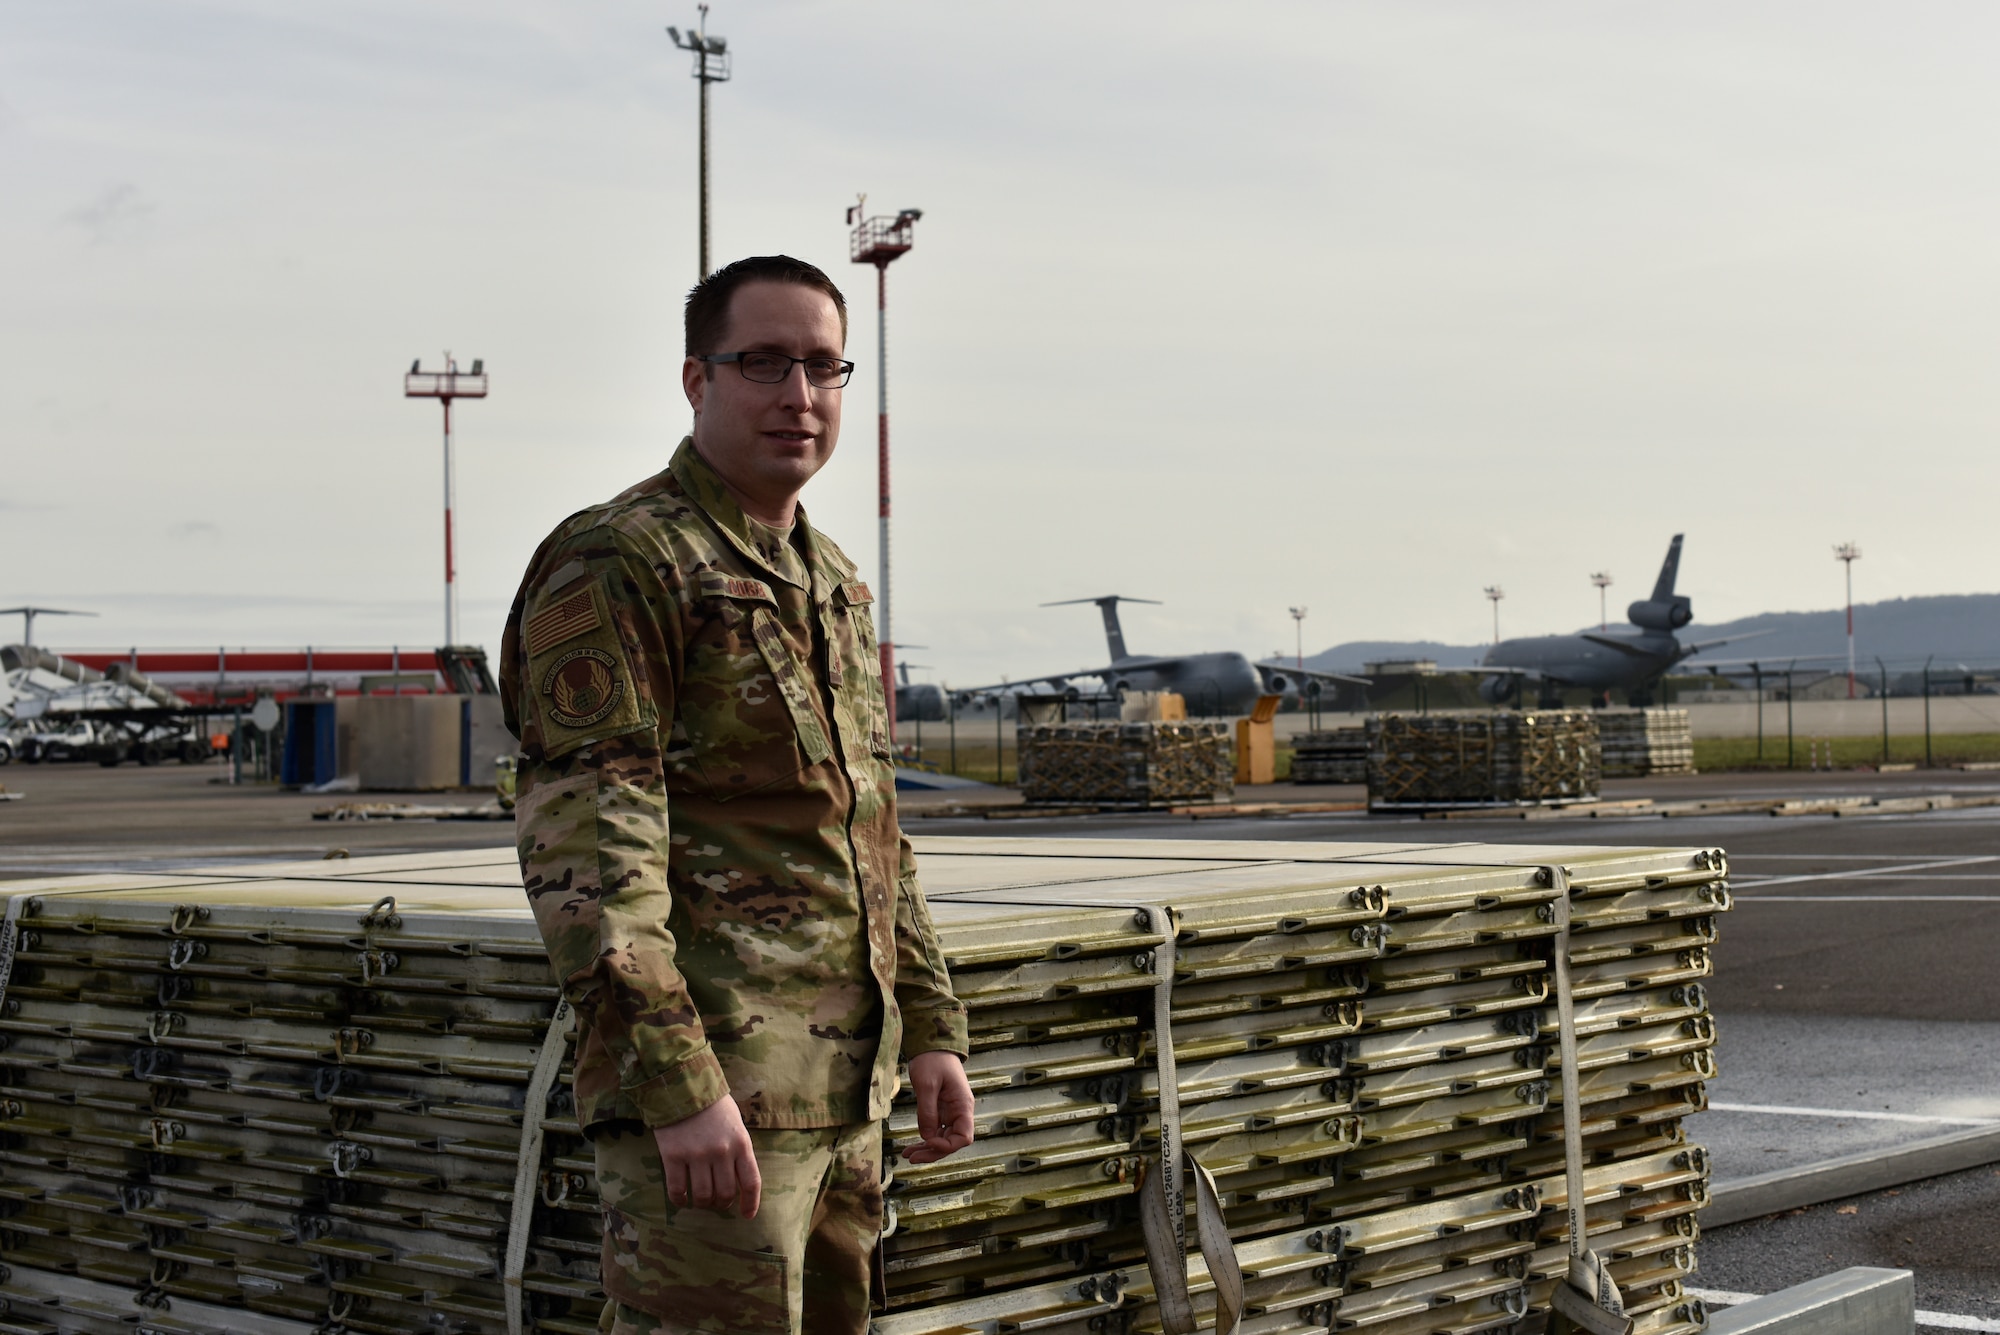 U.S. Air Force Tech. Sgt. Tyler J. Cobb, 86th Logistics Readiness Squadron cargo deployment function and air passenger terminal section chief, stands in front of a palette at Ramstein Air Base, Germany, Jan. 30, 2020.